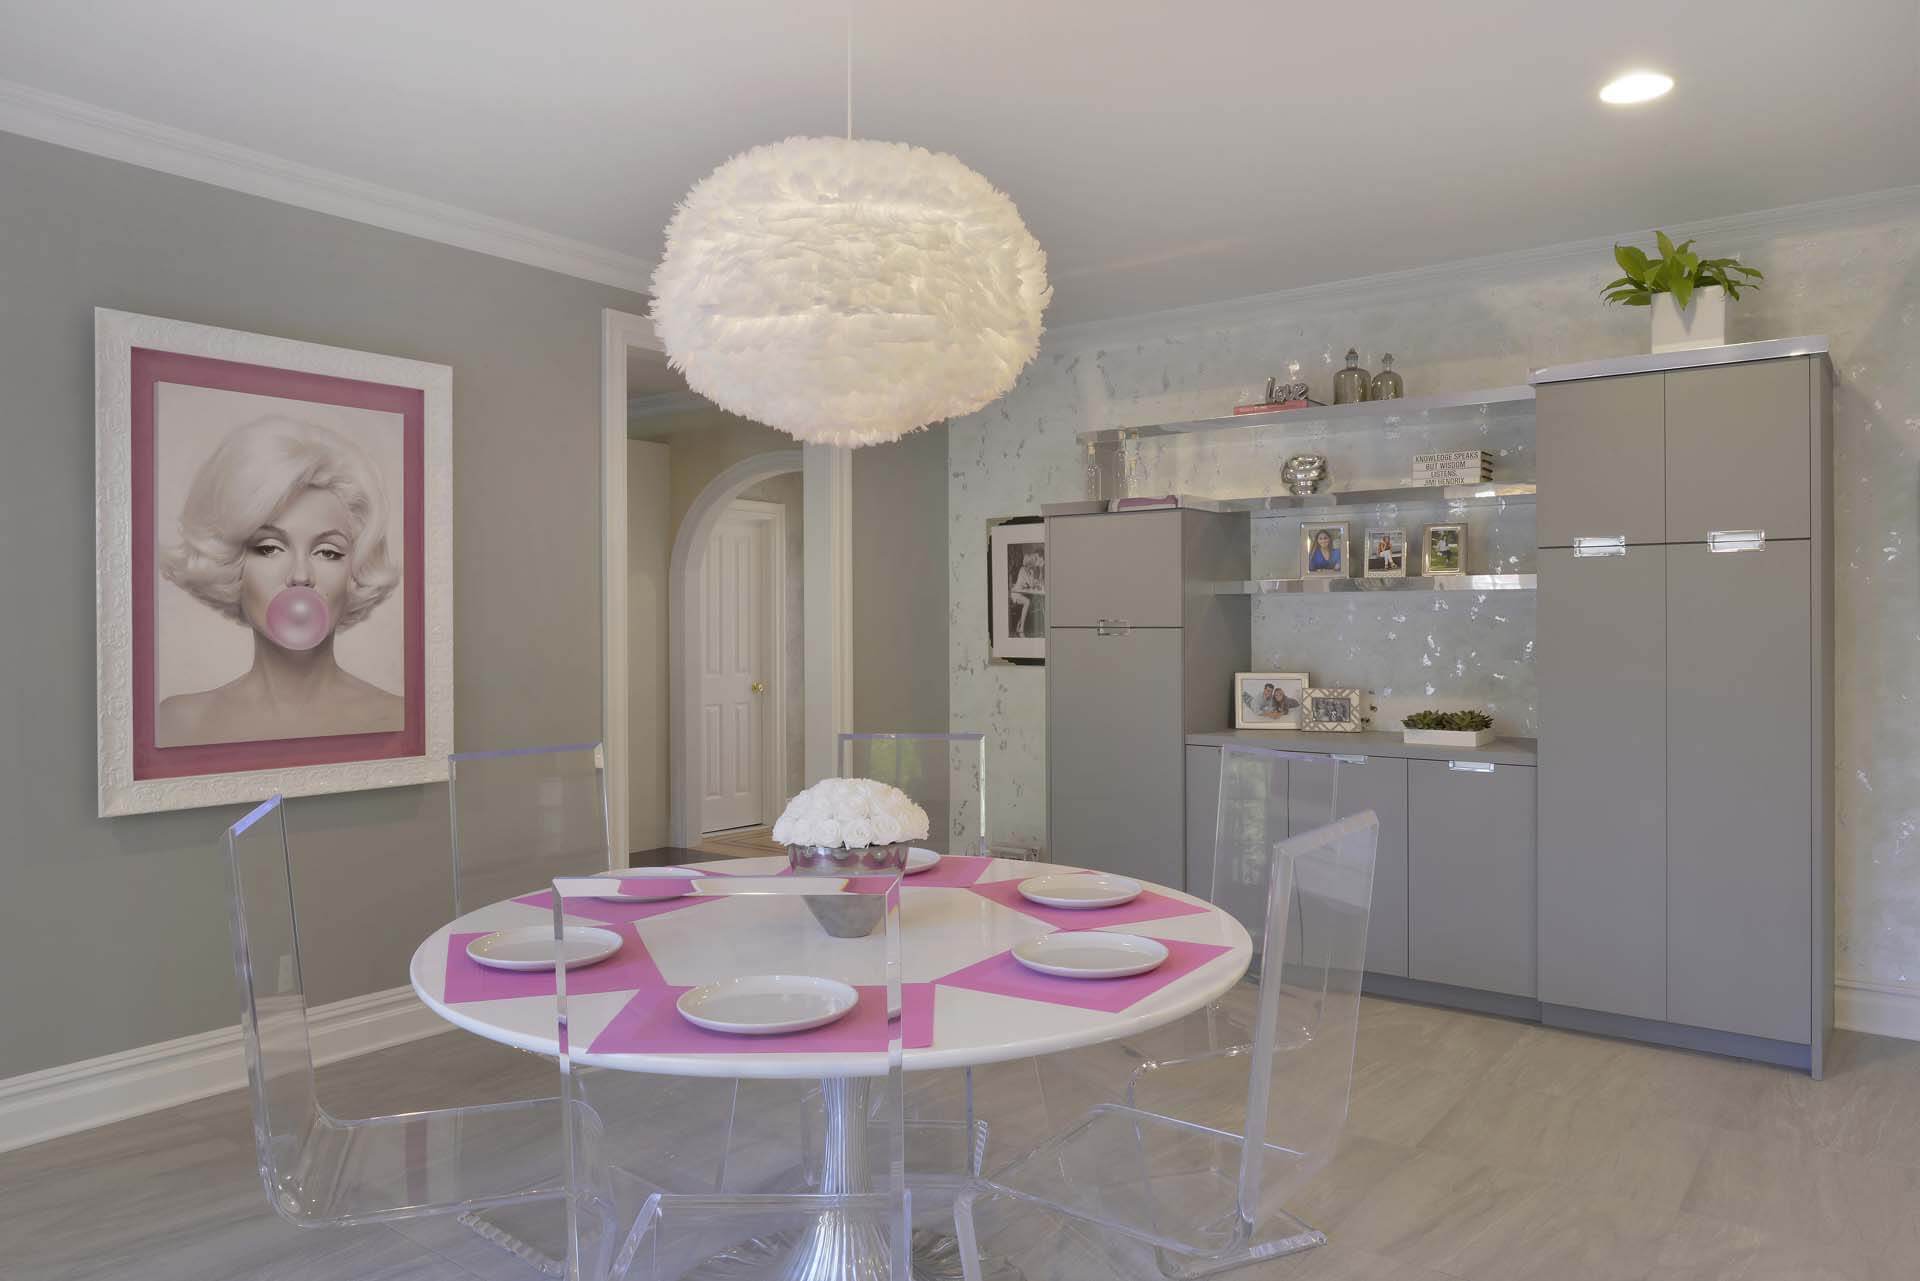 Playful kitchen features Bilotta cabinetry with silver accents and dining area with feathered chandelier.